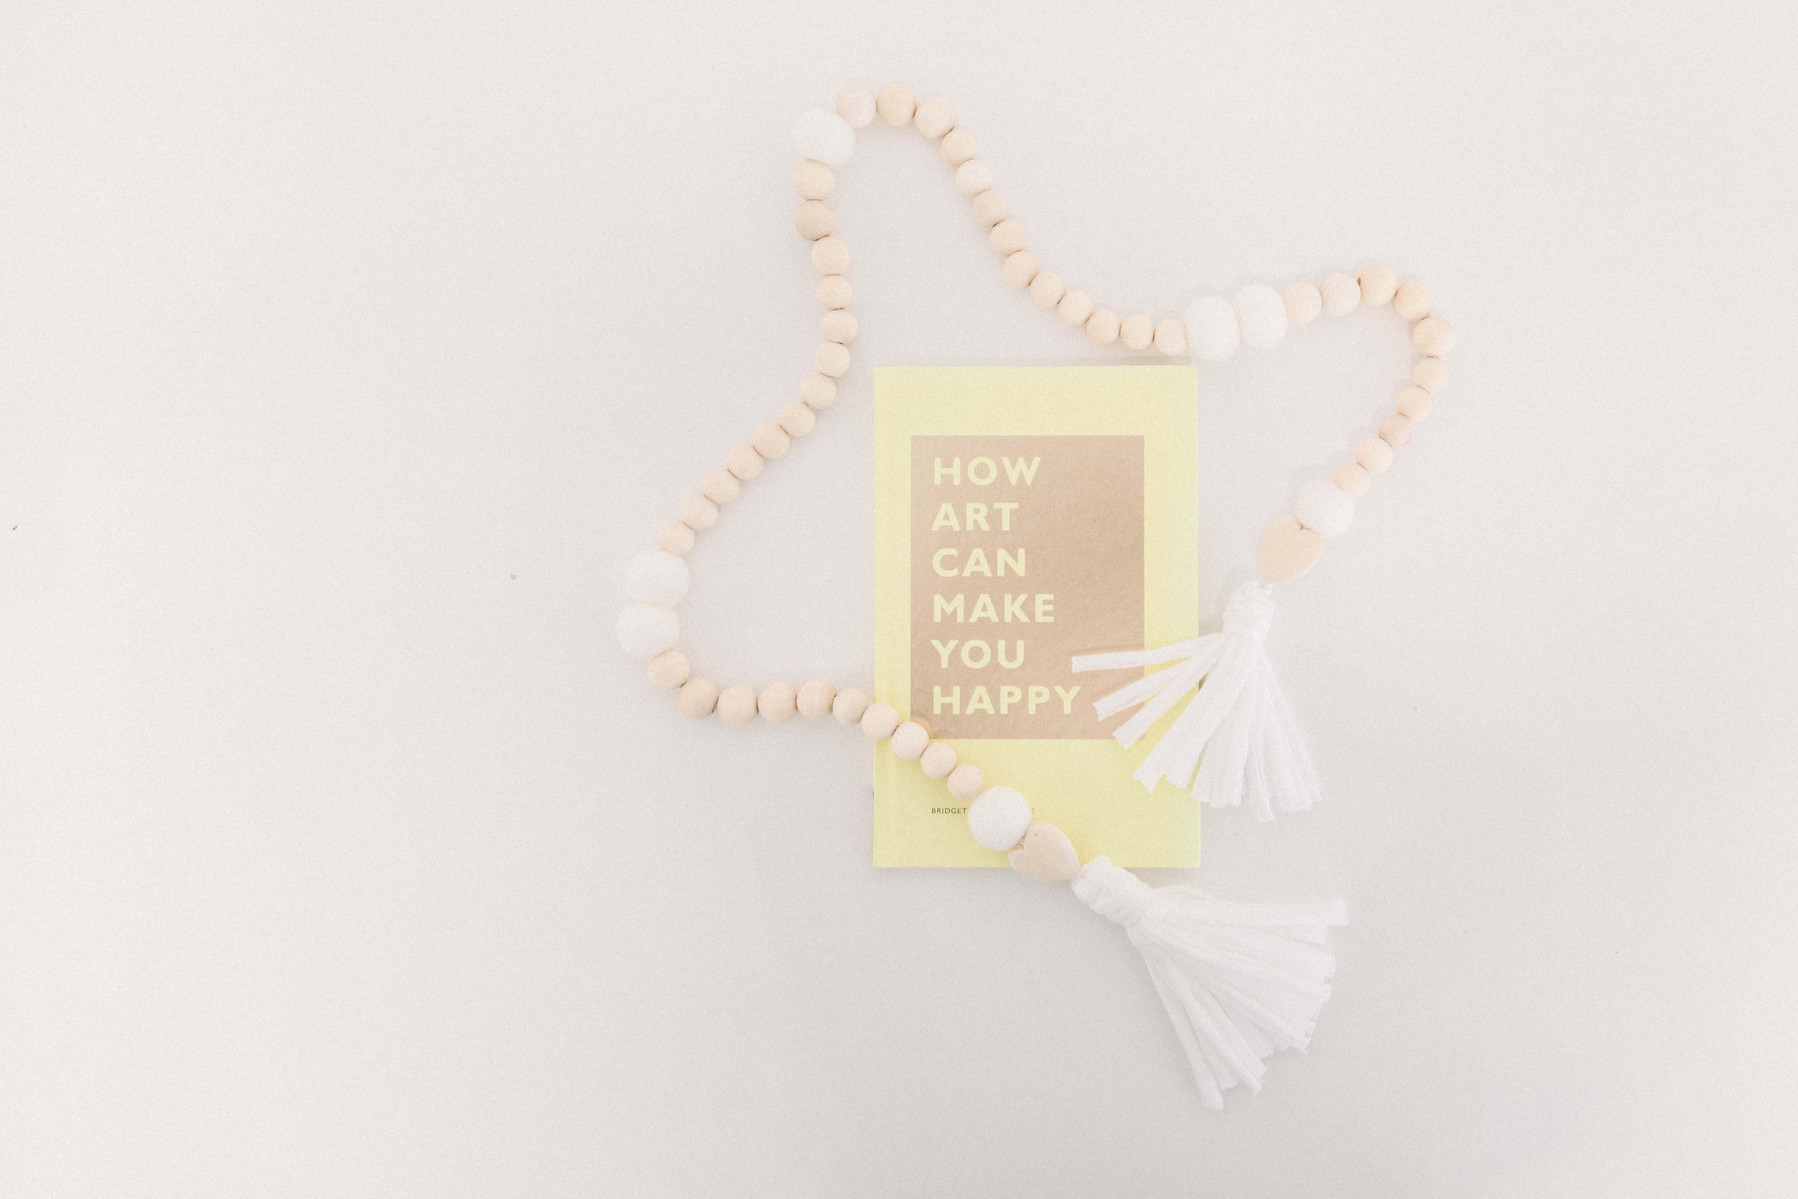 Product photo of handmade wooden garland and book called "How Art Can Make You Happy". Emily VanderBeek Photography, branding photography, portrait photography, Niagara portrait photographer, Niagara branding photographer.